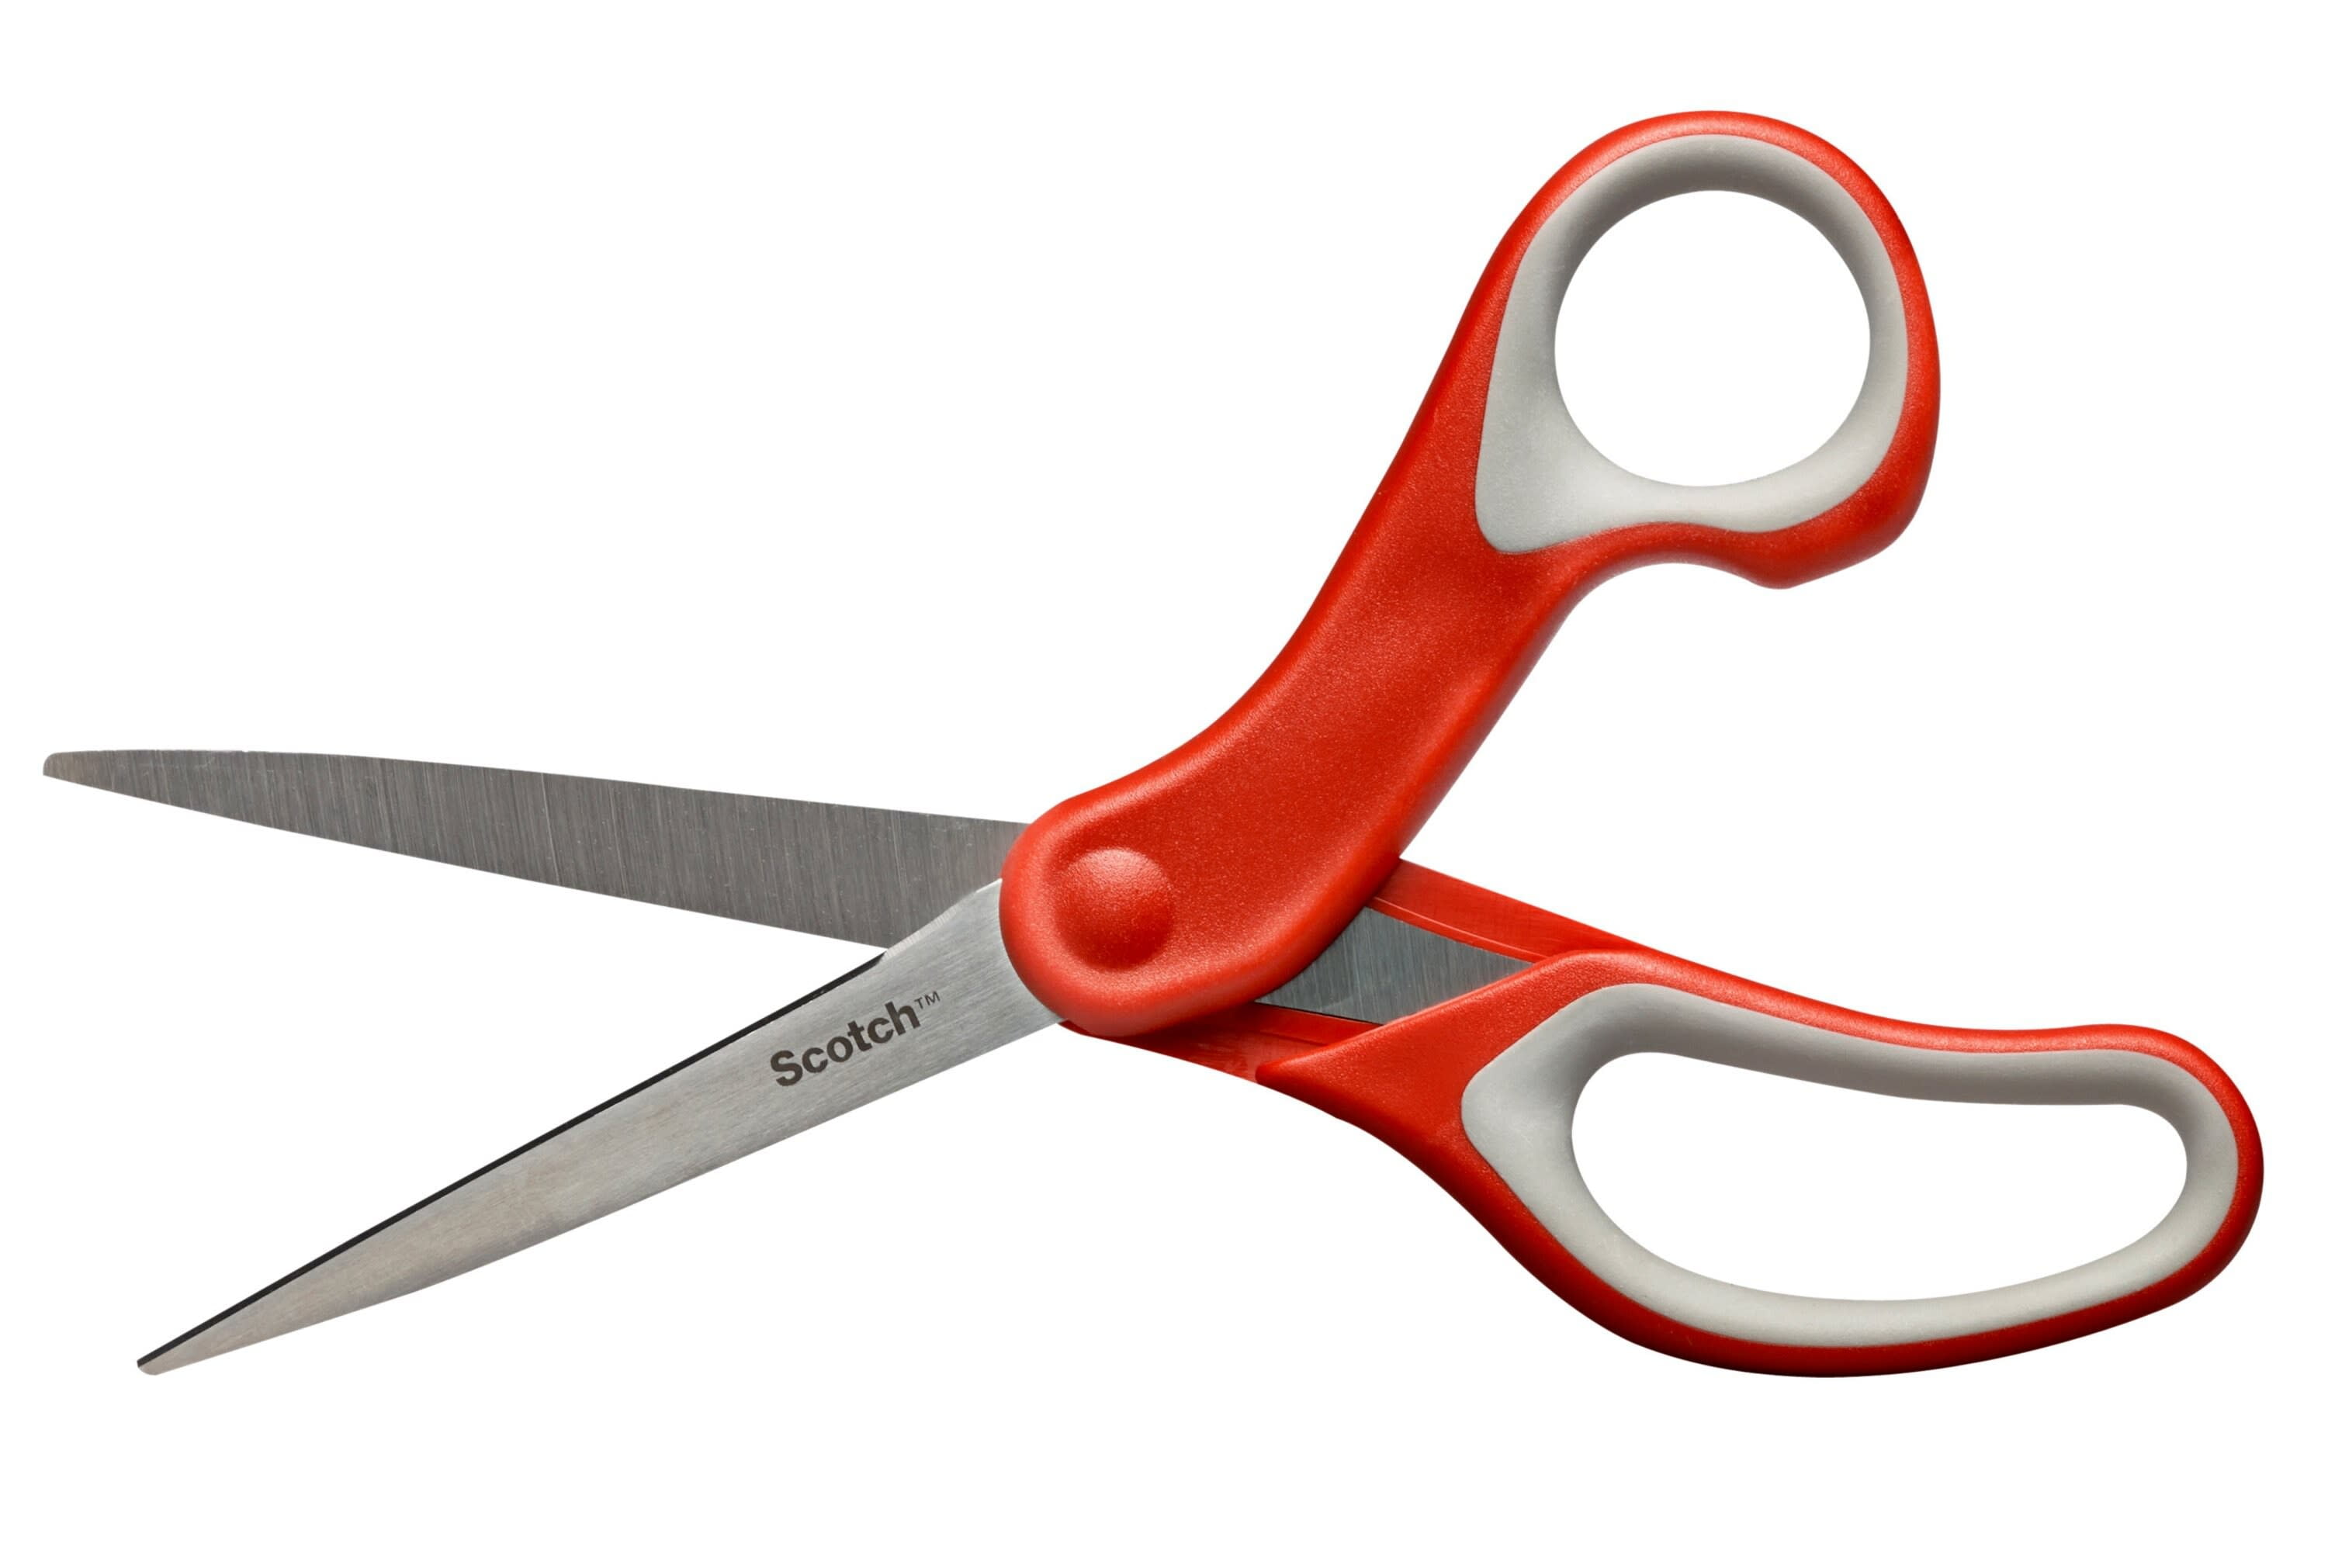 Scotch Precision Scissors 8  Hy-Vee Aisles Online Grocery Shopping